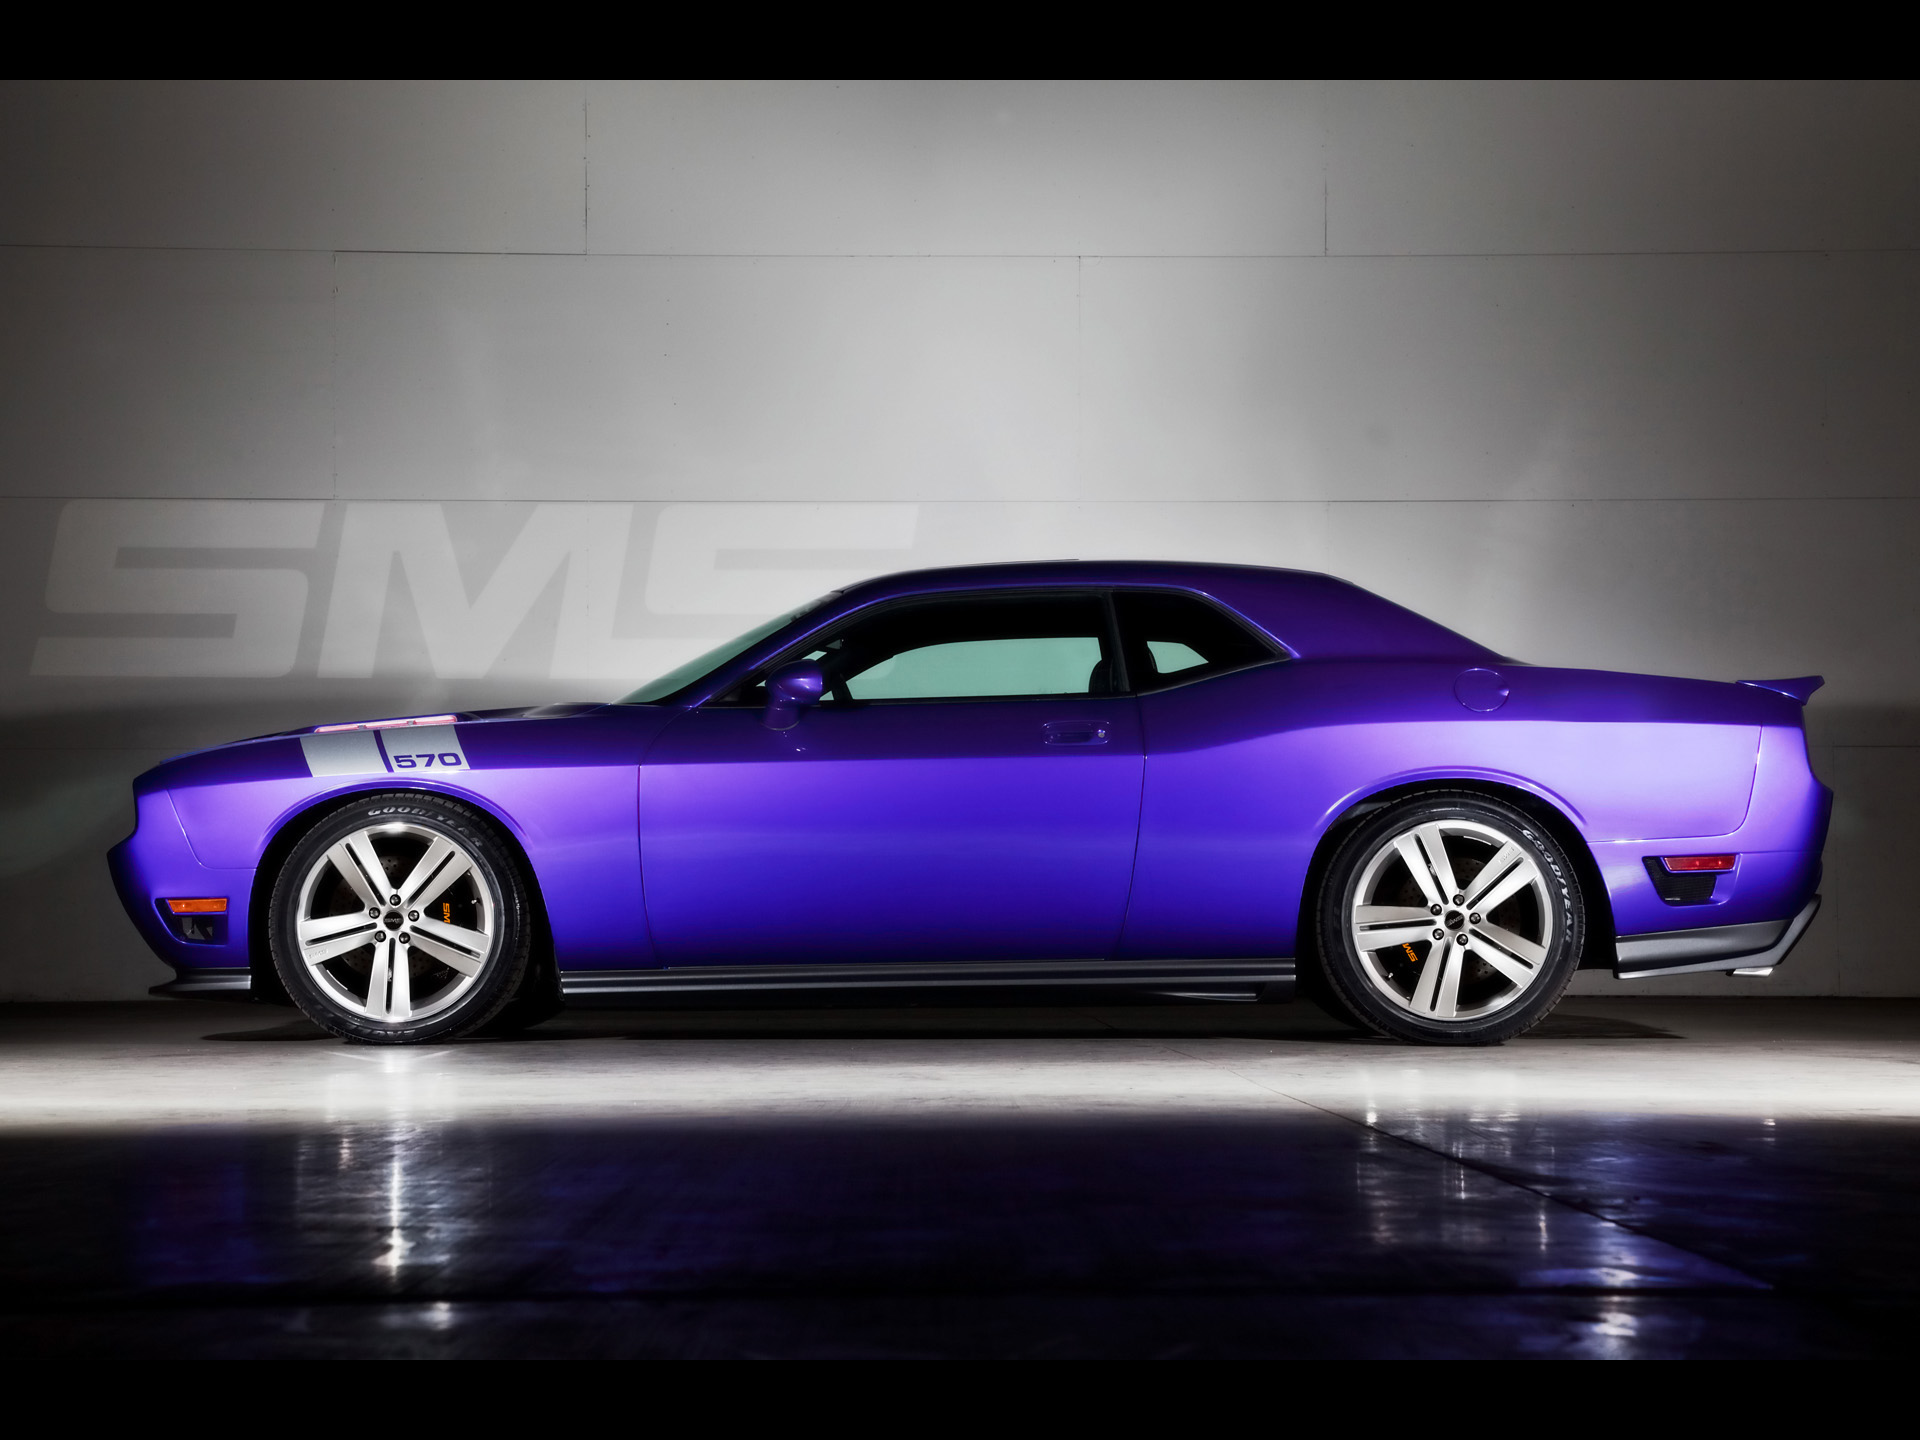 You can vote for this SMS 570 Dodge Challenger photo